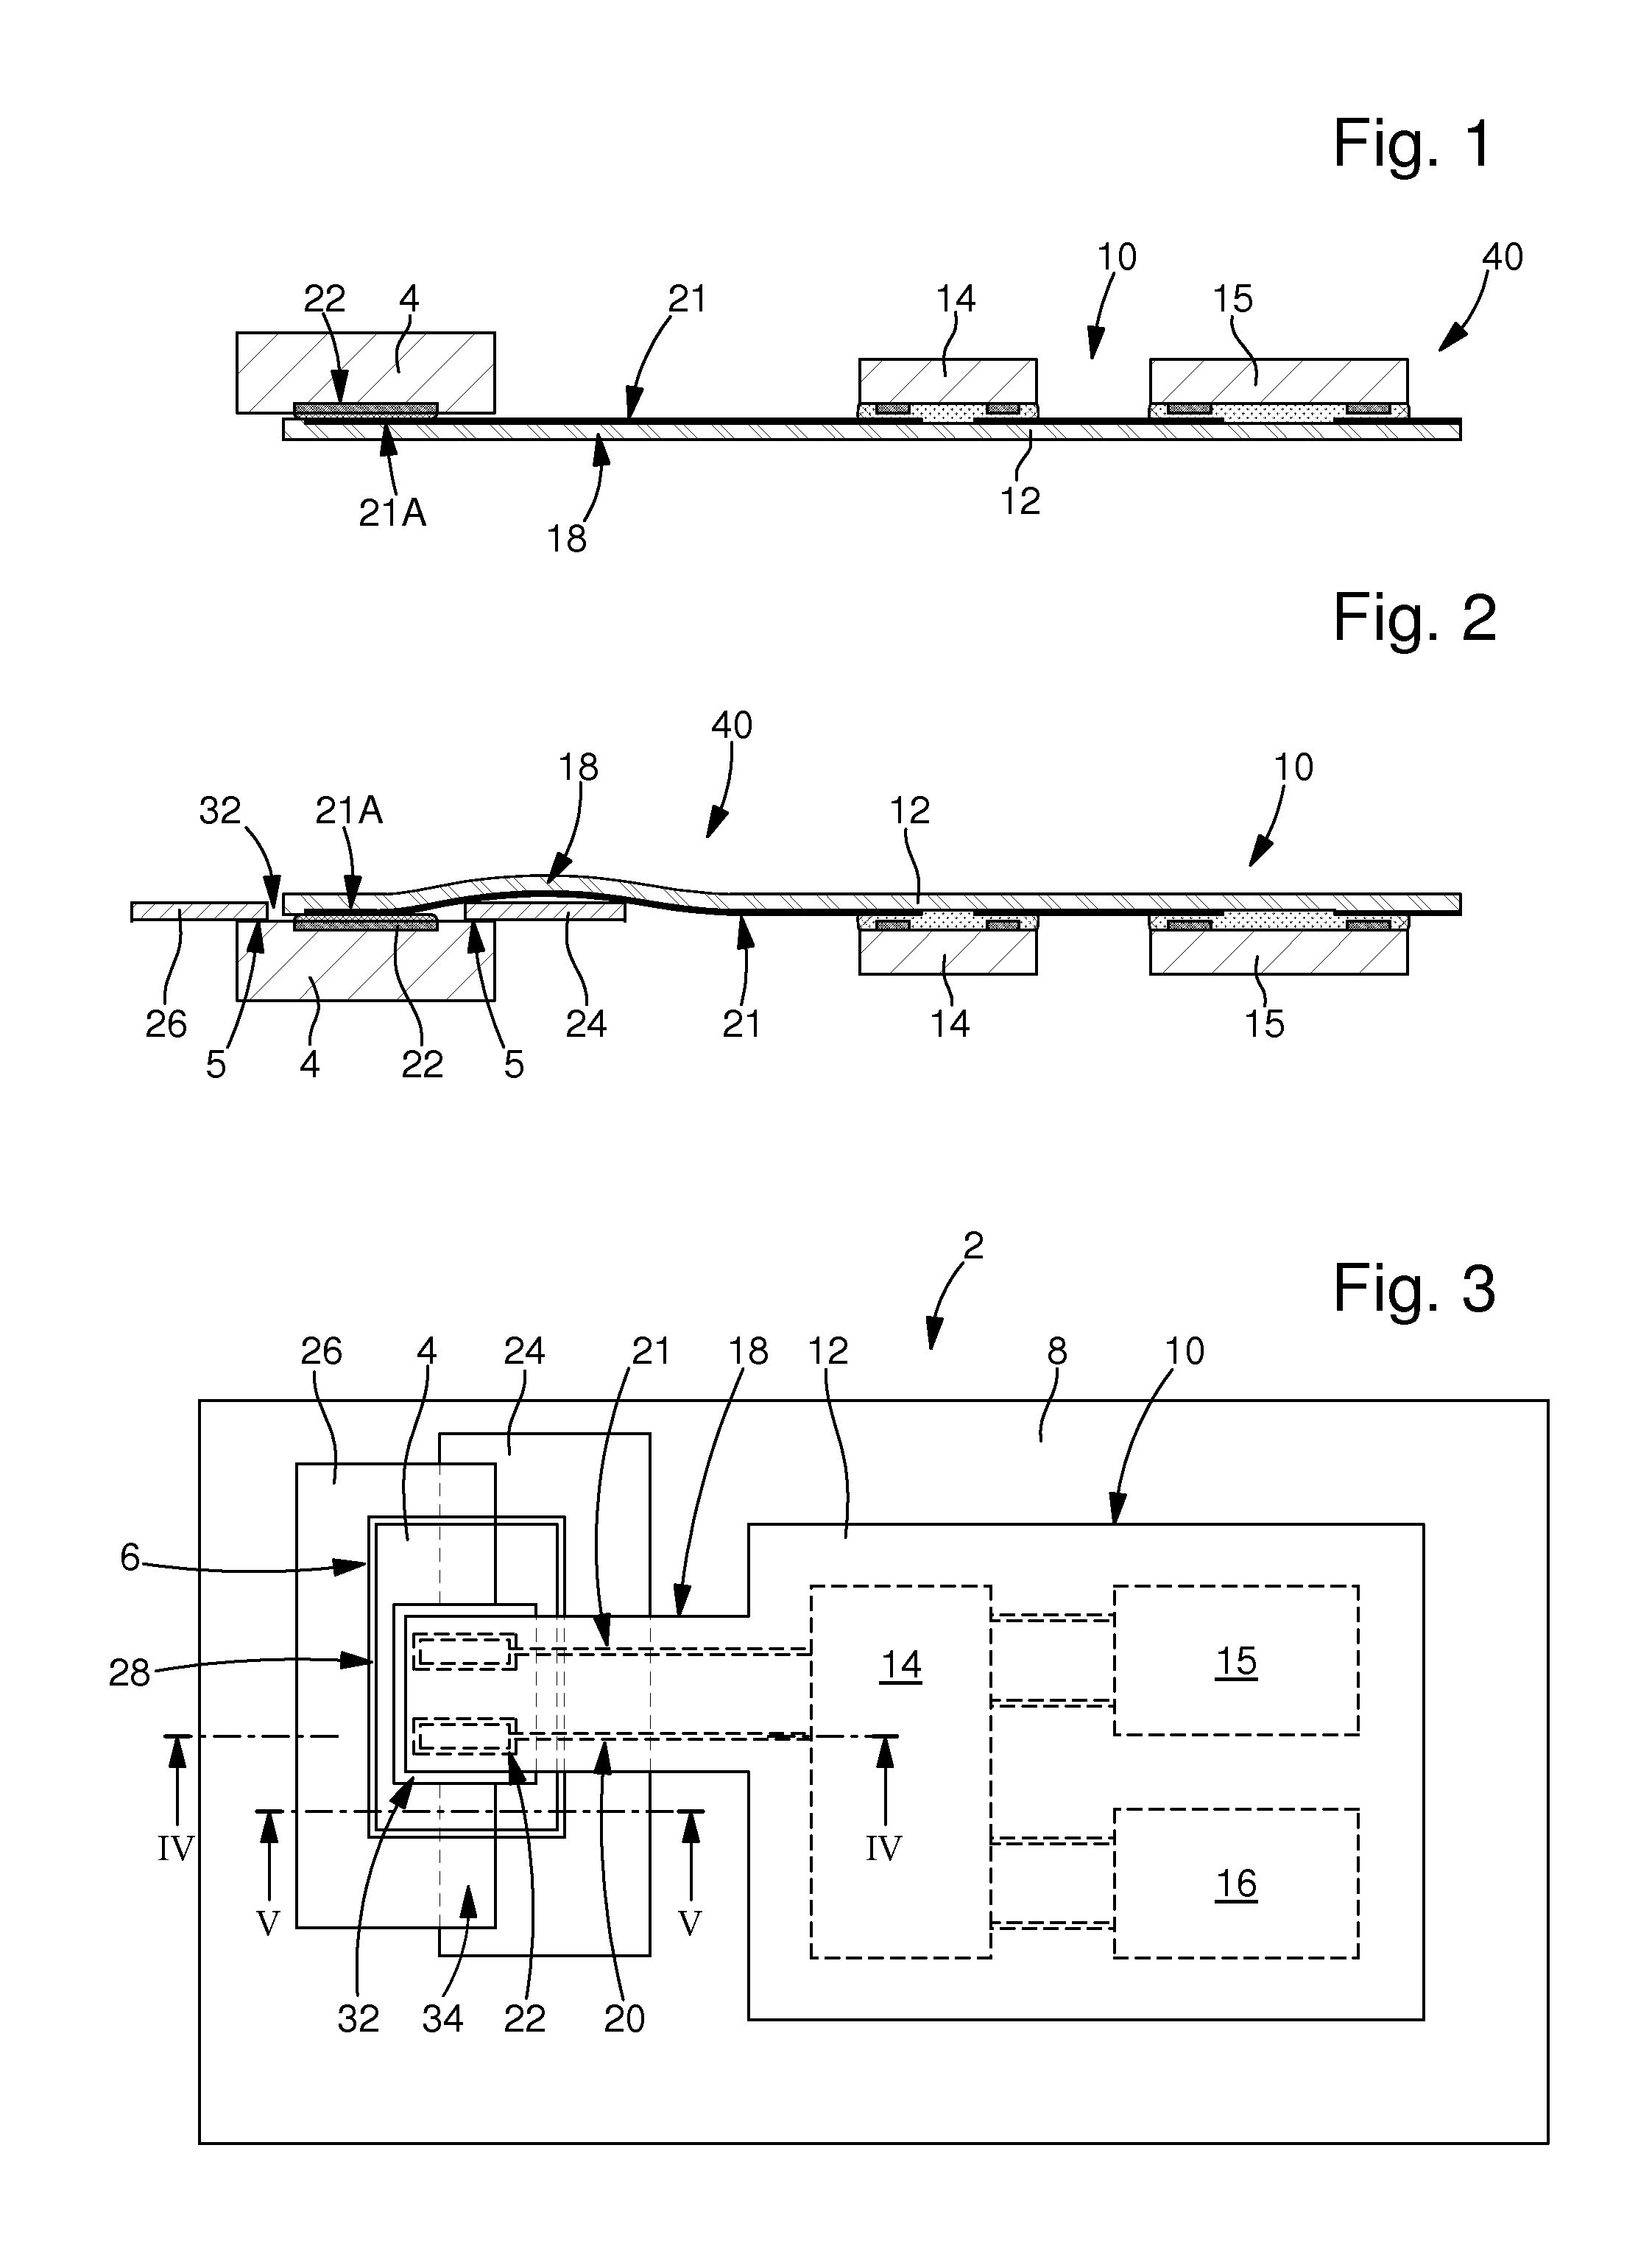 Method of manufacturing electronic cards